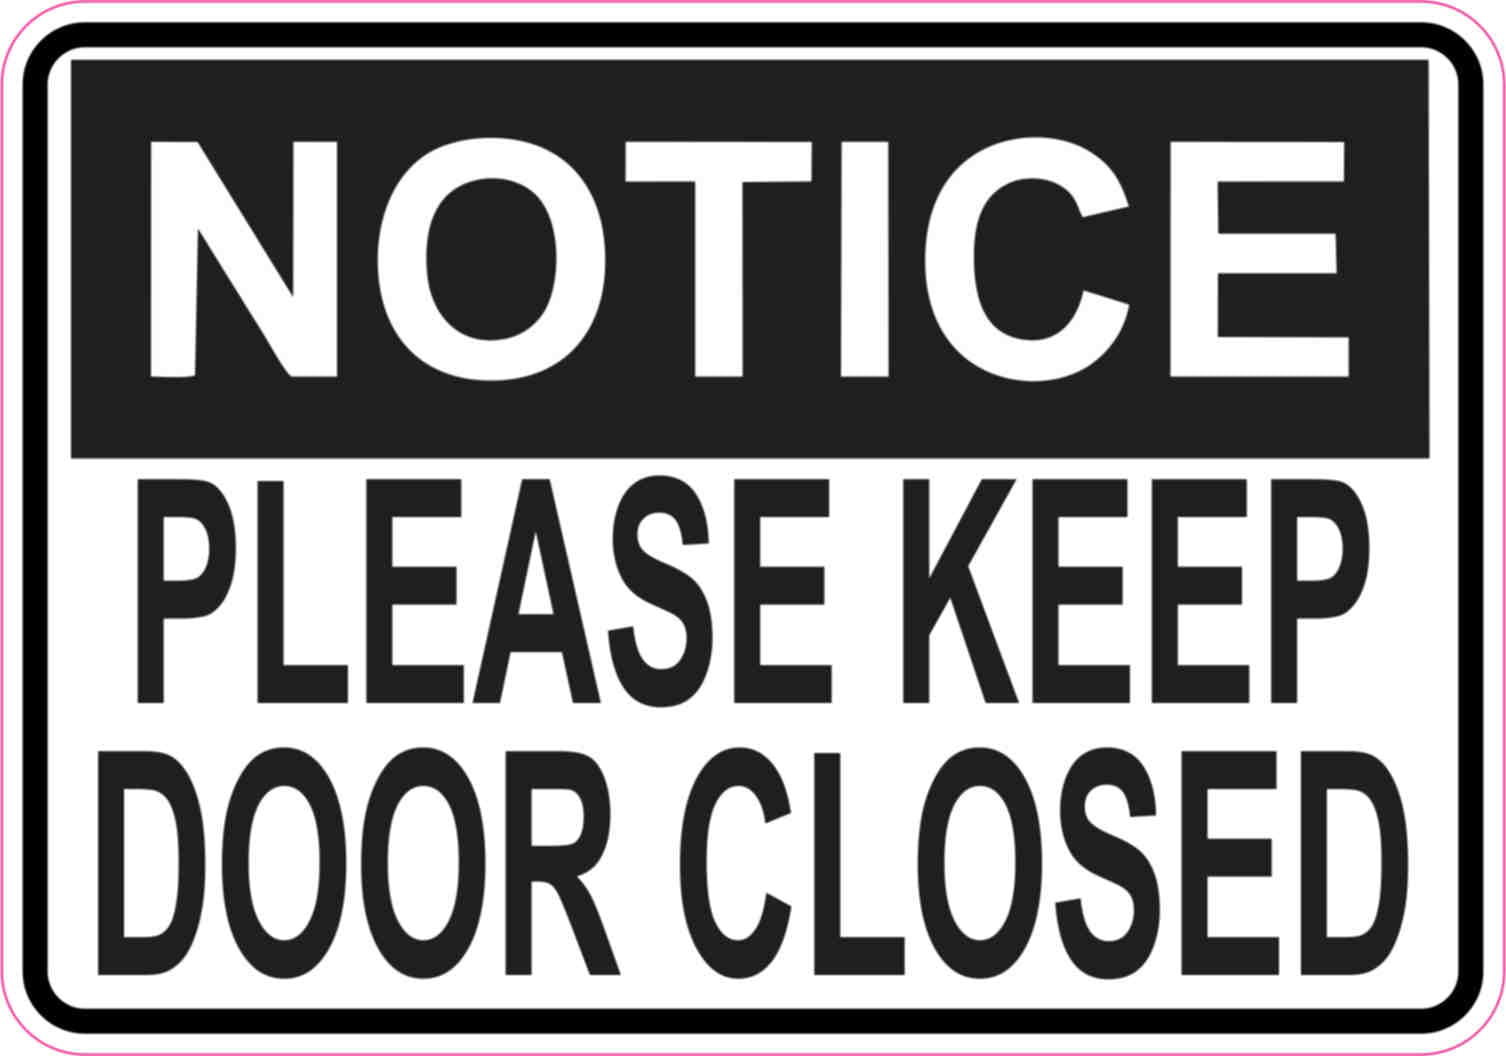 Keep This Door Closed Sticker Business Safety Warning Vinyl Self Adhesive Decal 